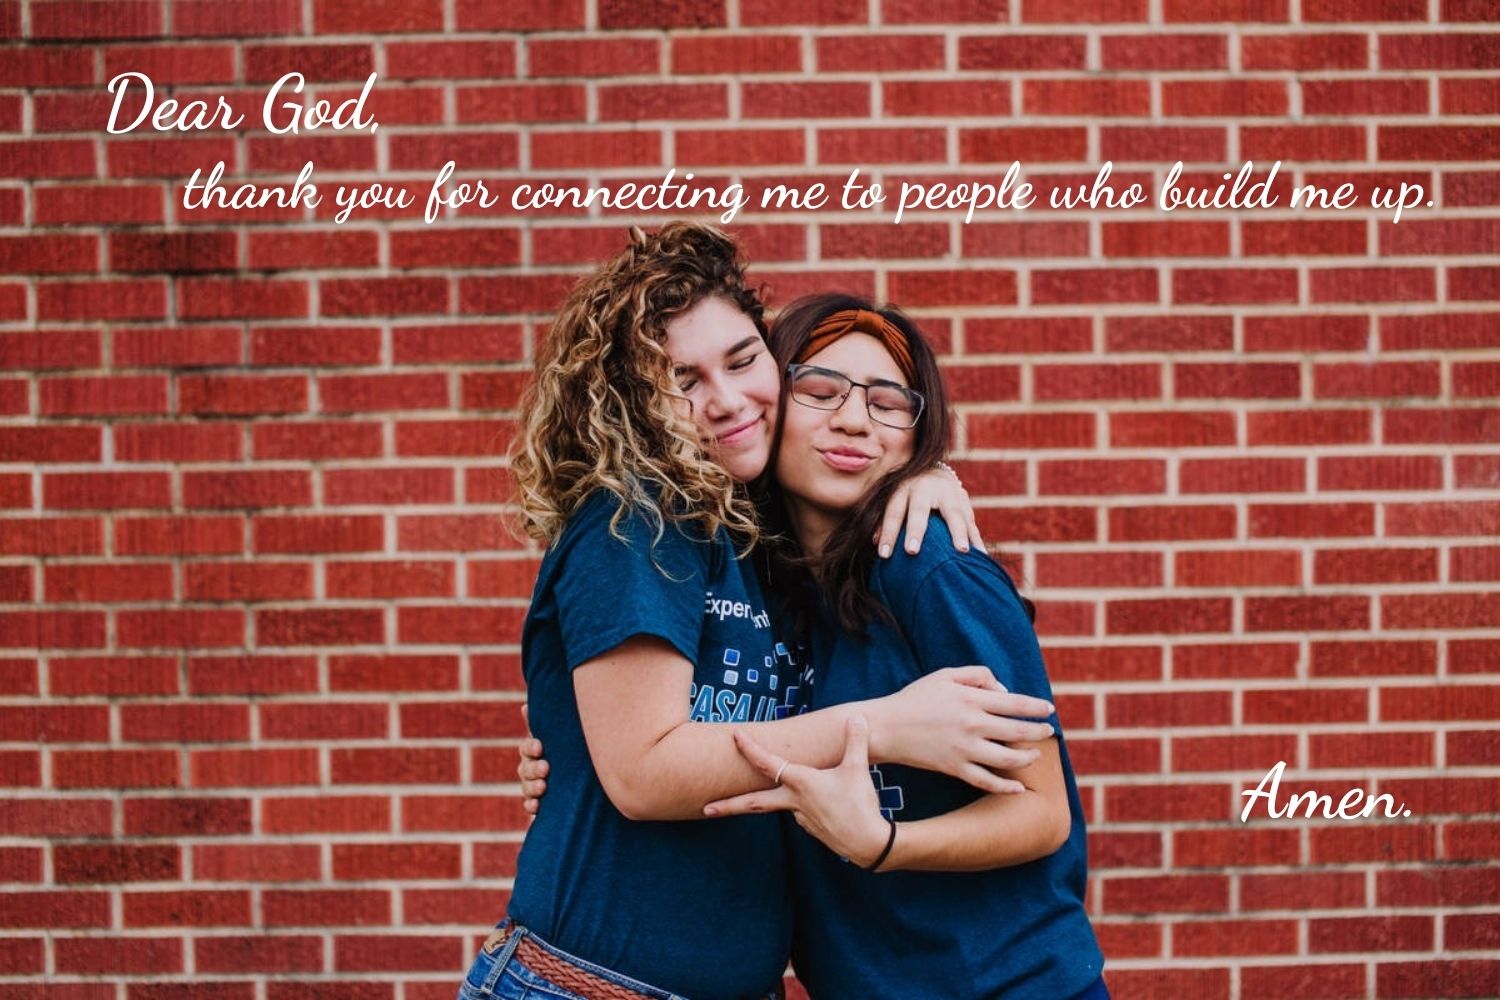 The Bible tells us to build each other up. (Thessalonians 5:11) We thank God for the people in our lives, both nearby and at a distance, who encourage us. Photo from Casa Linda United Methodist Church, Dallas, Texas, USA, 2018, courtesy of United Methodist Communications with Canva design.